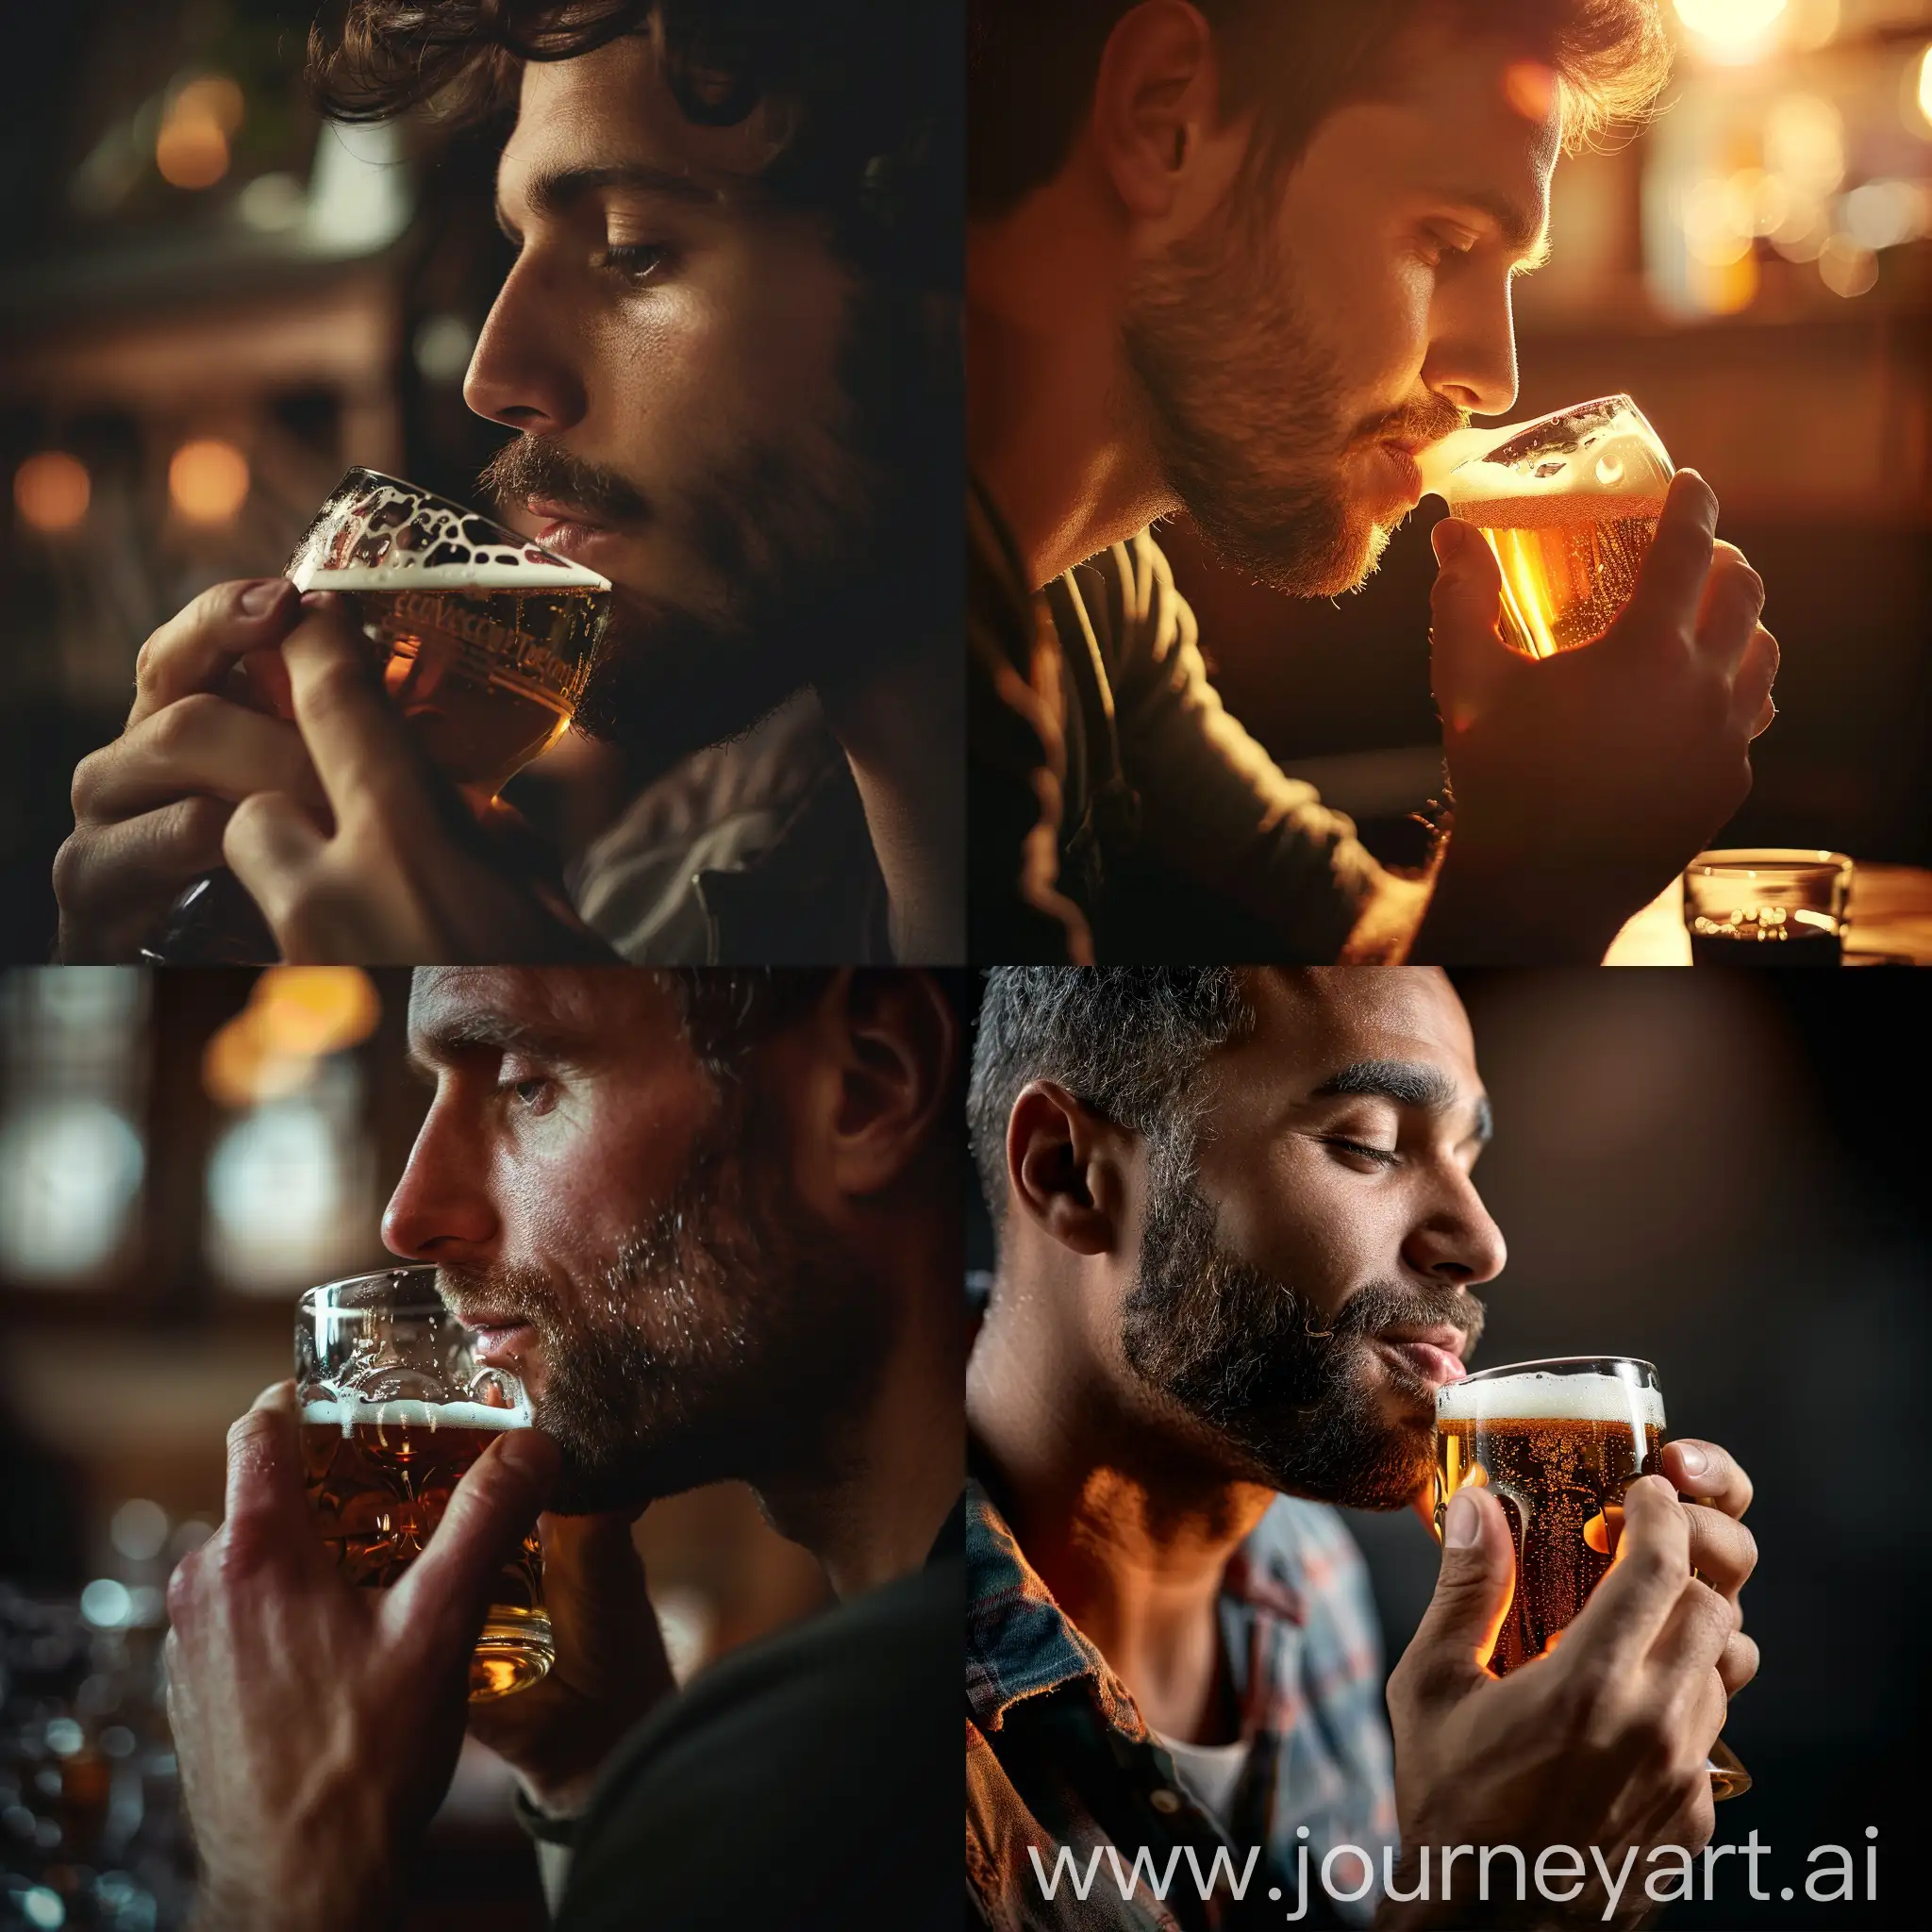 Man tasting beer,  Digital photography, Contemporary era, Warm tones primarily with a shallow depth of field and soft lighting.